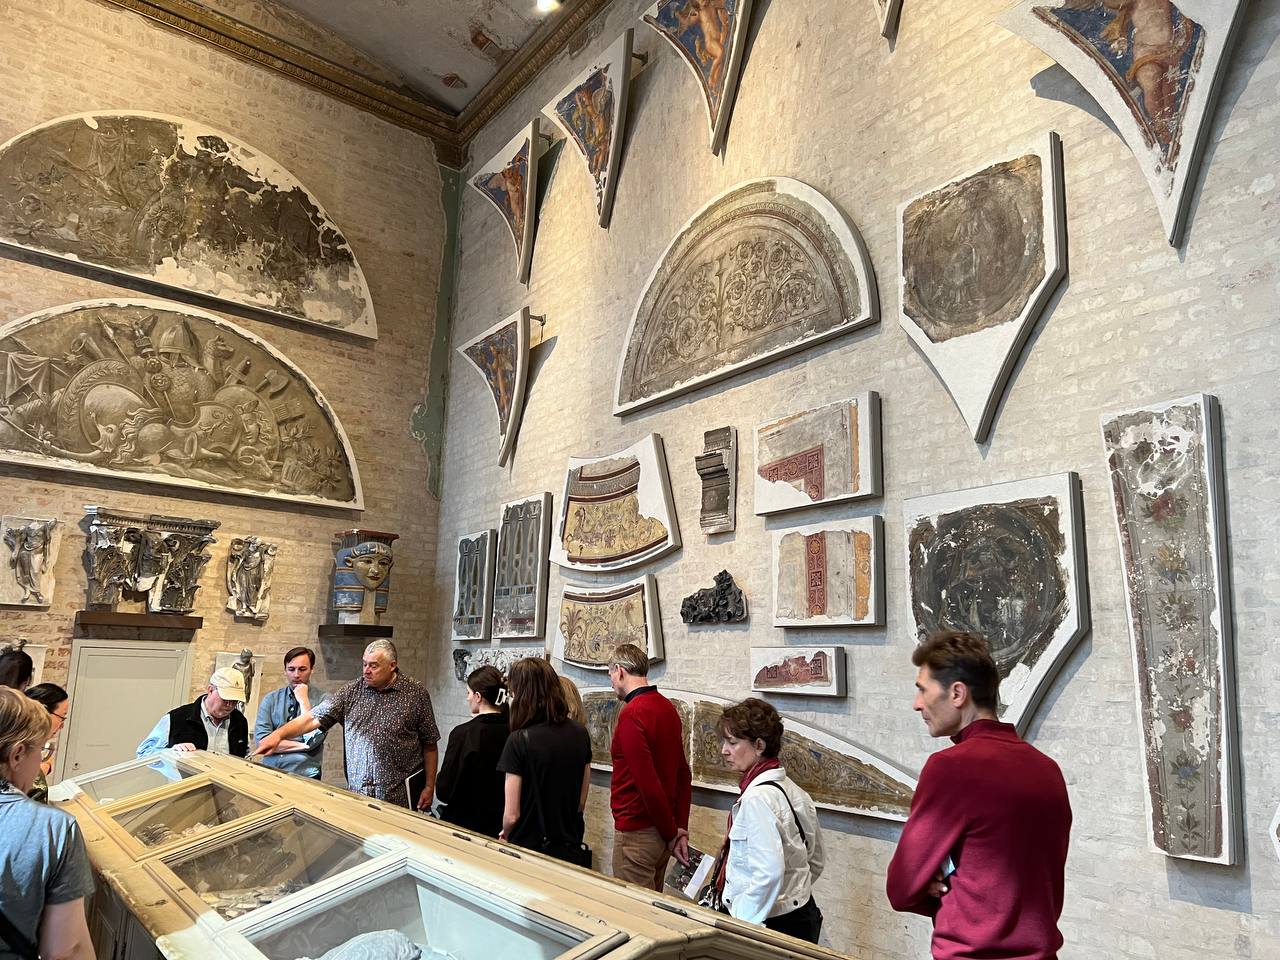 Visitors explore a historic room adorned with ancient fresco fragments at the Neues Museum in Berlin, examining displayed artifacts.